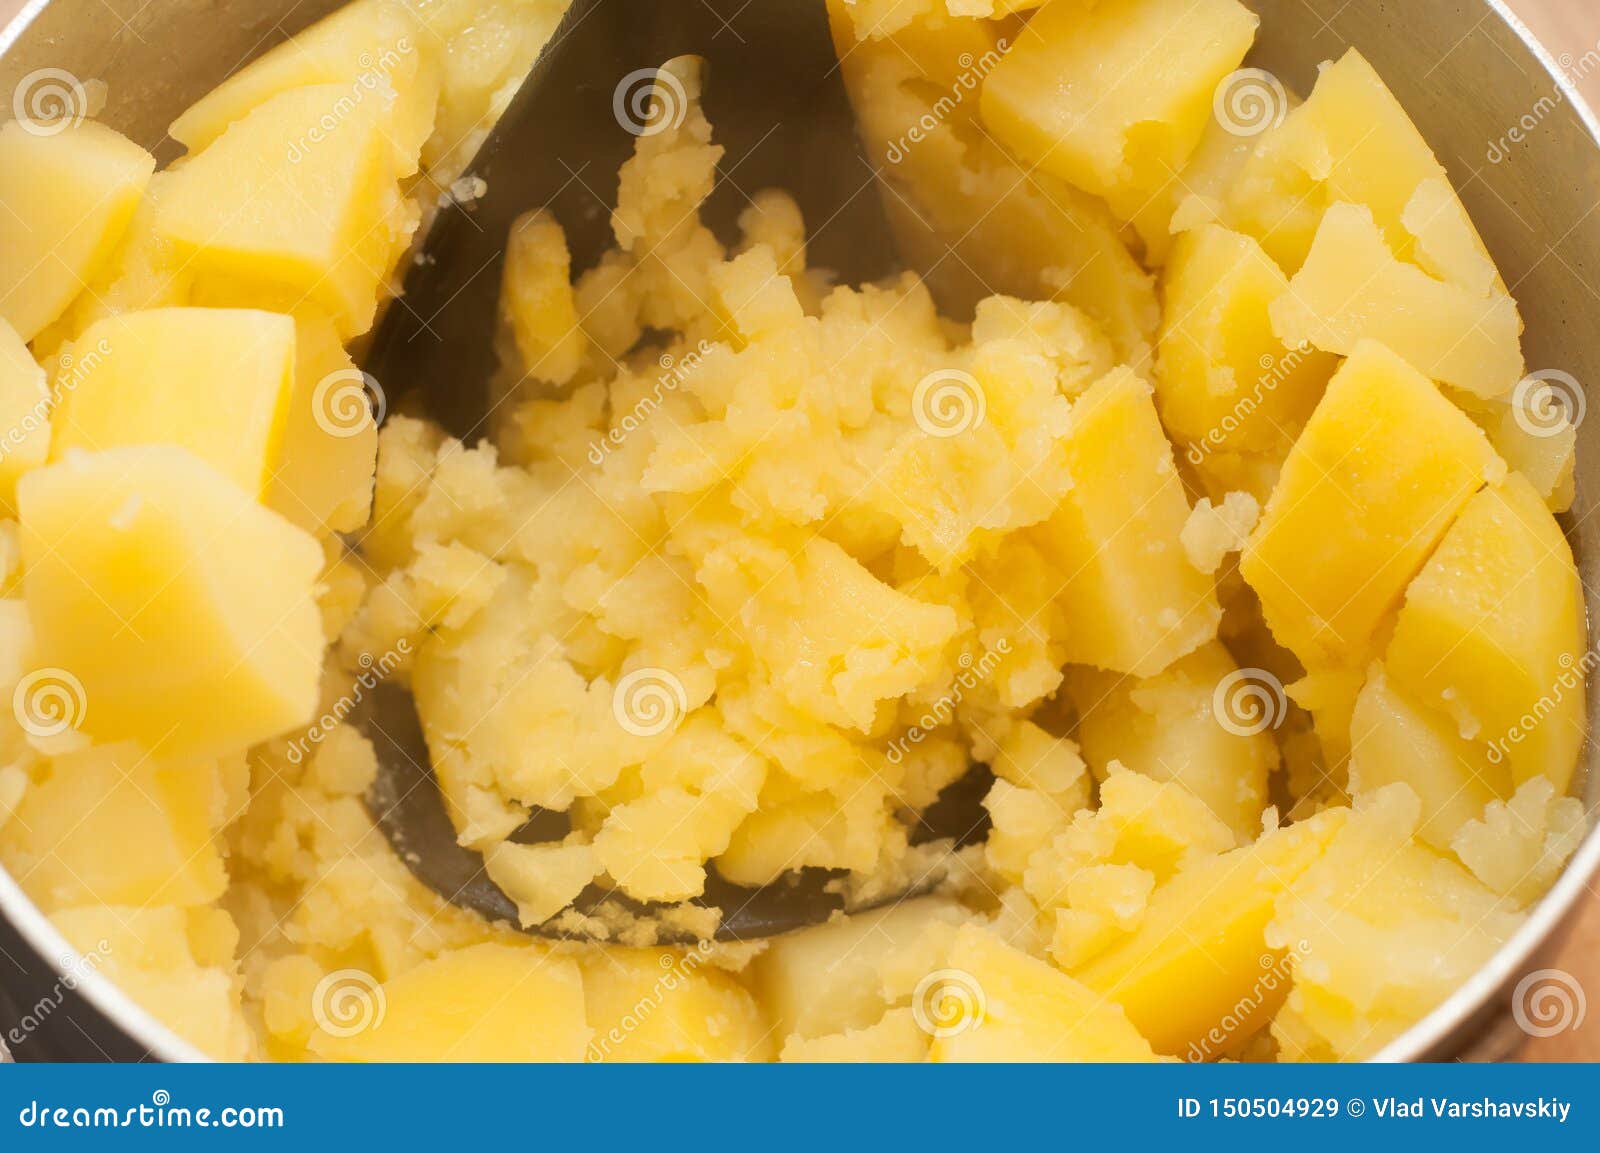 Can i steam potatoes for mashed potatoes фото 42